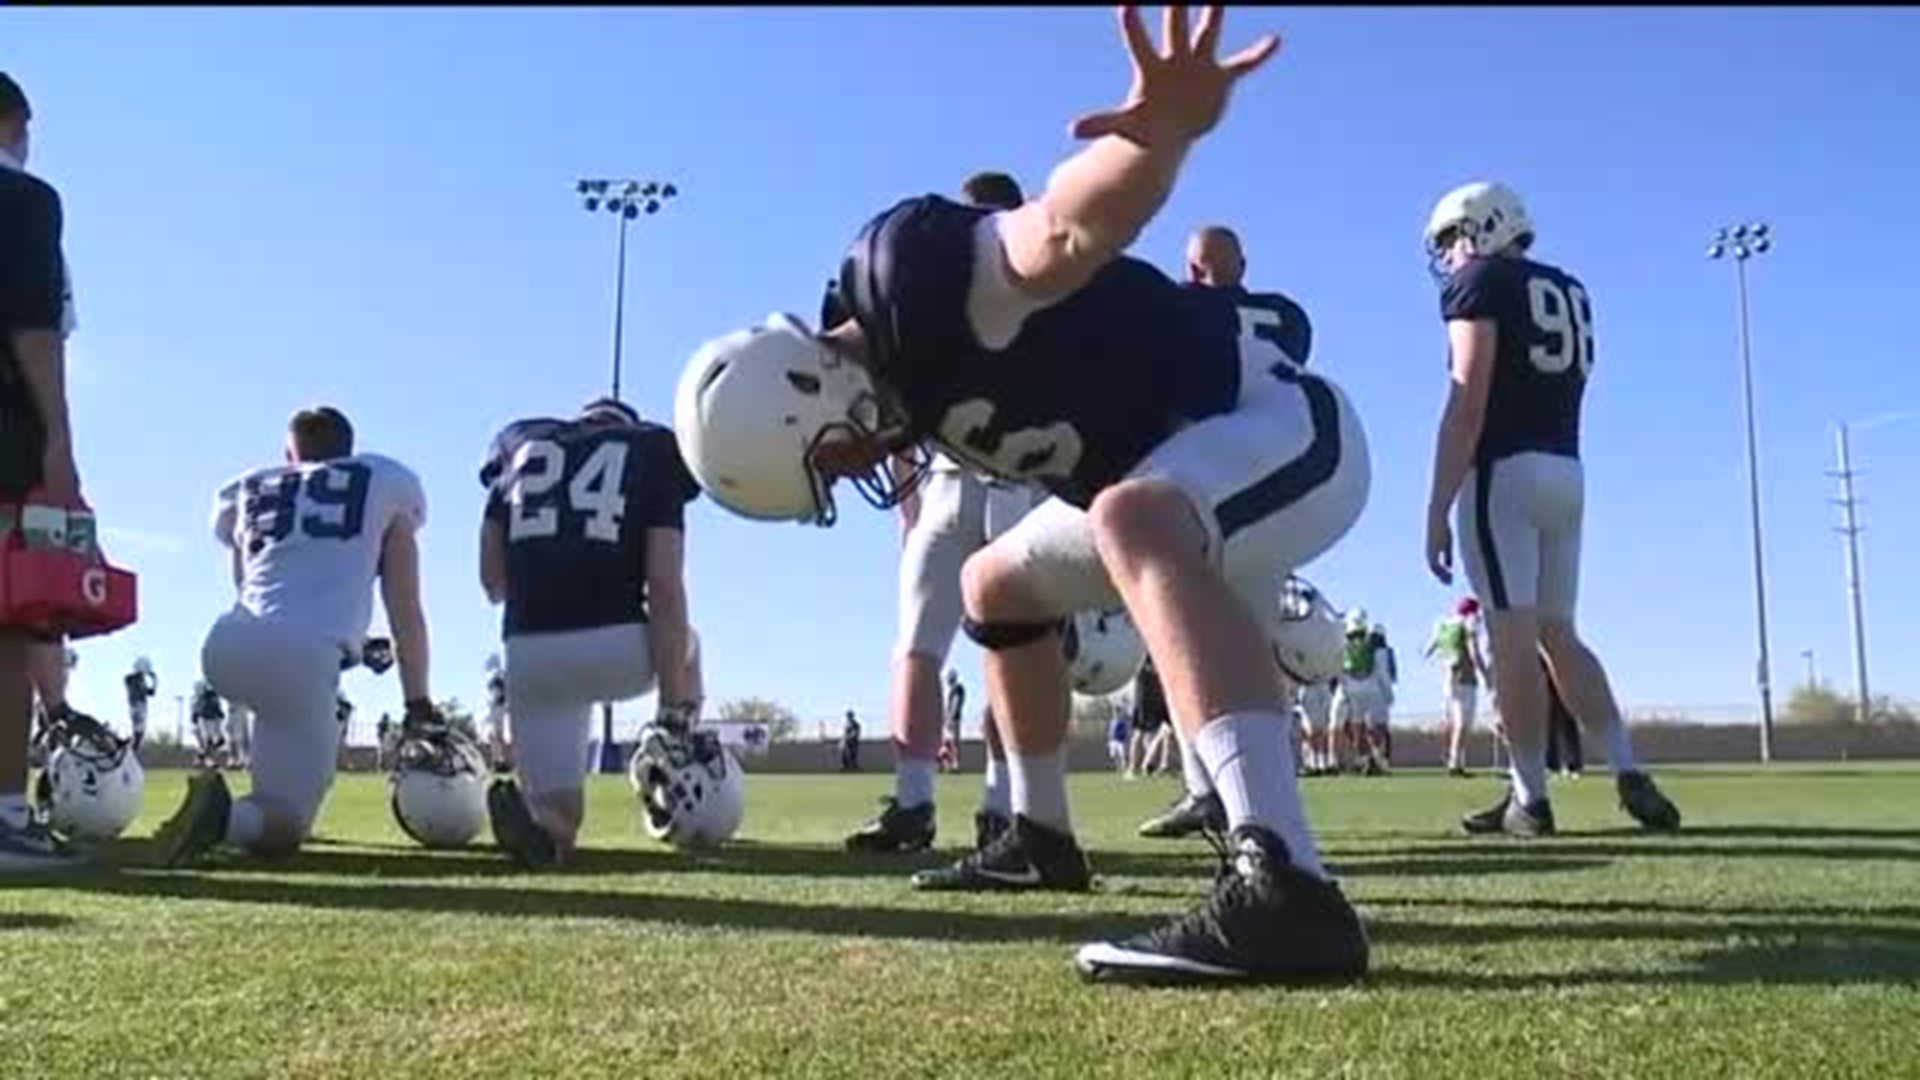 Penn State Football Player Gets Scholarship in Viral Video